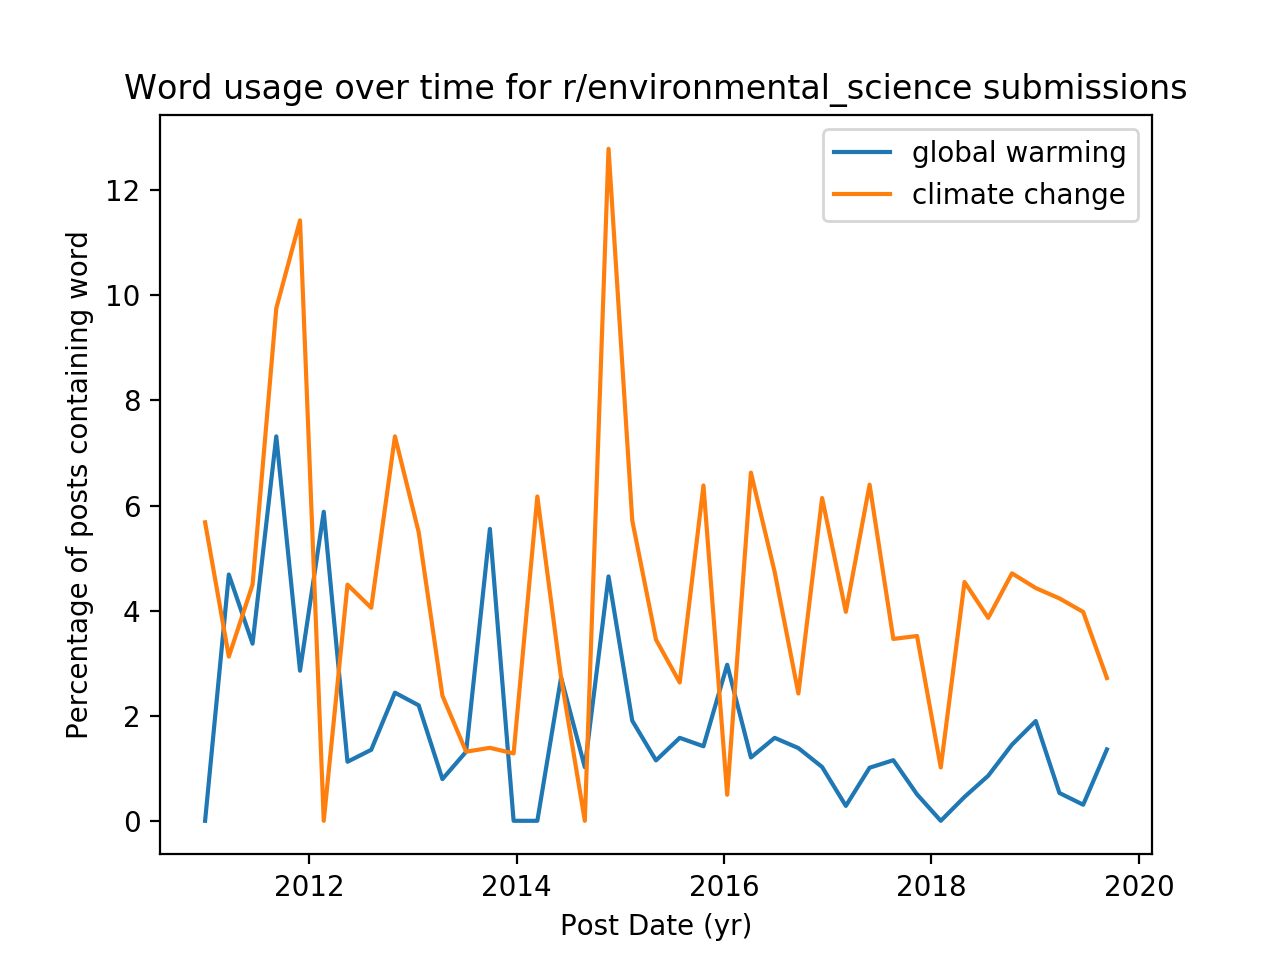 Submissions in the subreddit r/environmental_science that mention climate change or global warming